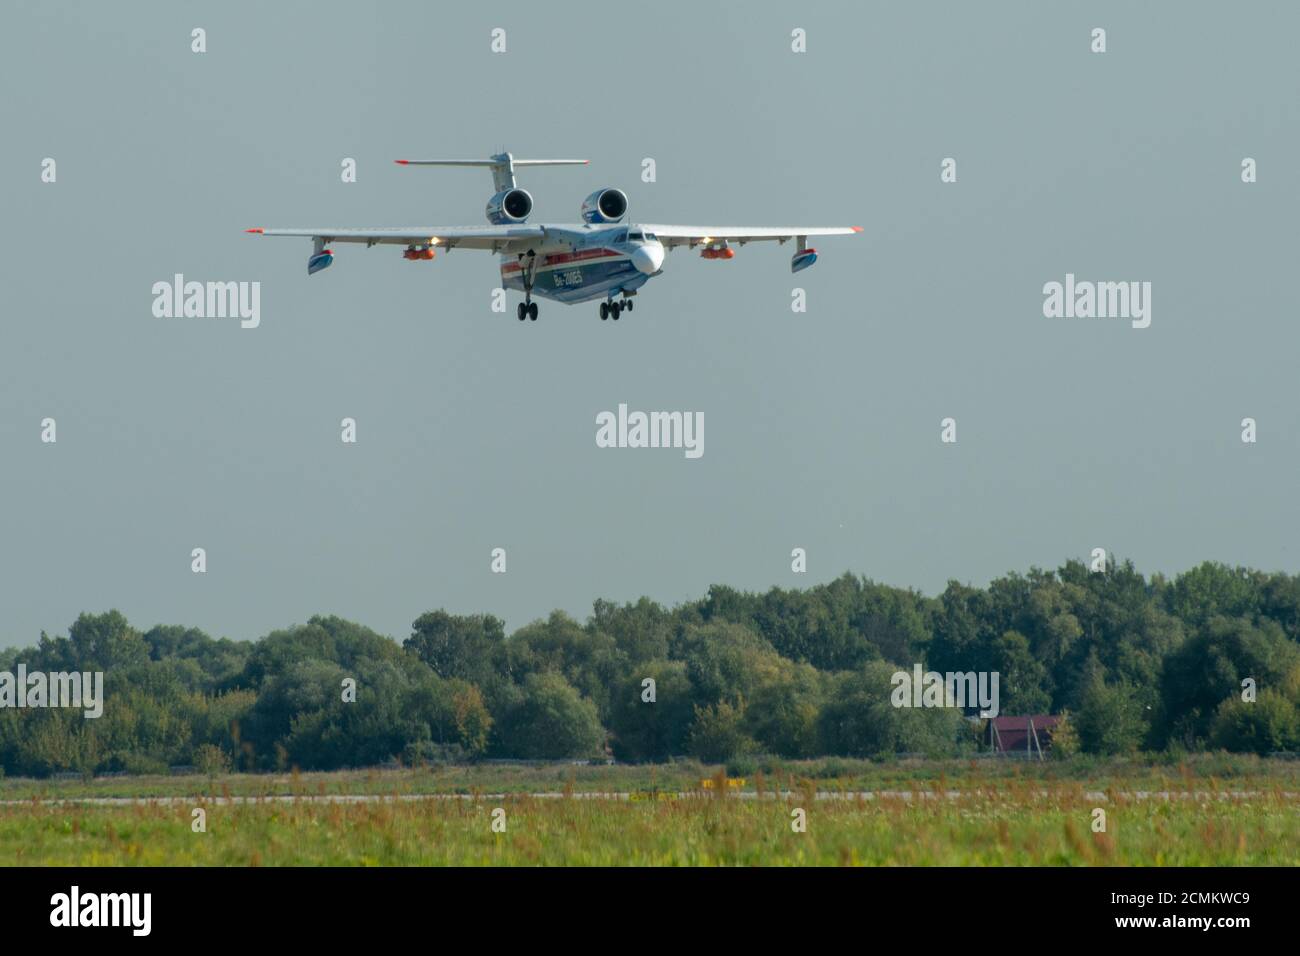 August 30, 2019. Zhukovsky, Russia. Multipurpose amphibious aircraft Beriev Be-200 Altair  at the International Aviation and Space Salon MAKS 2019. Stock Photo